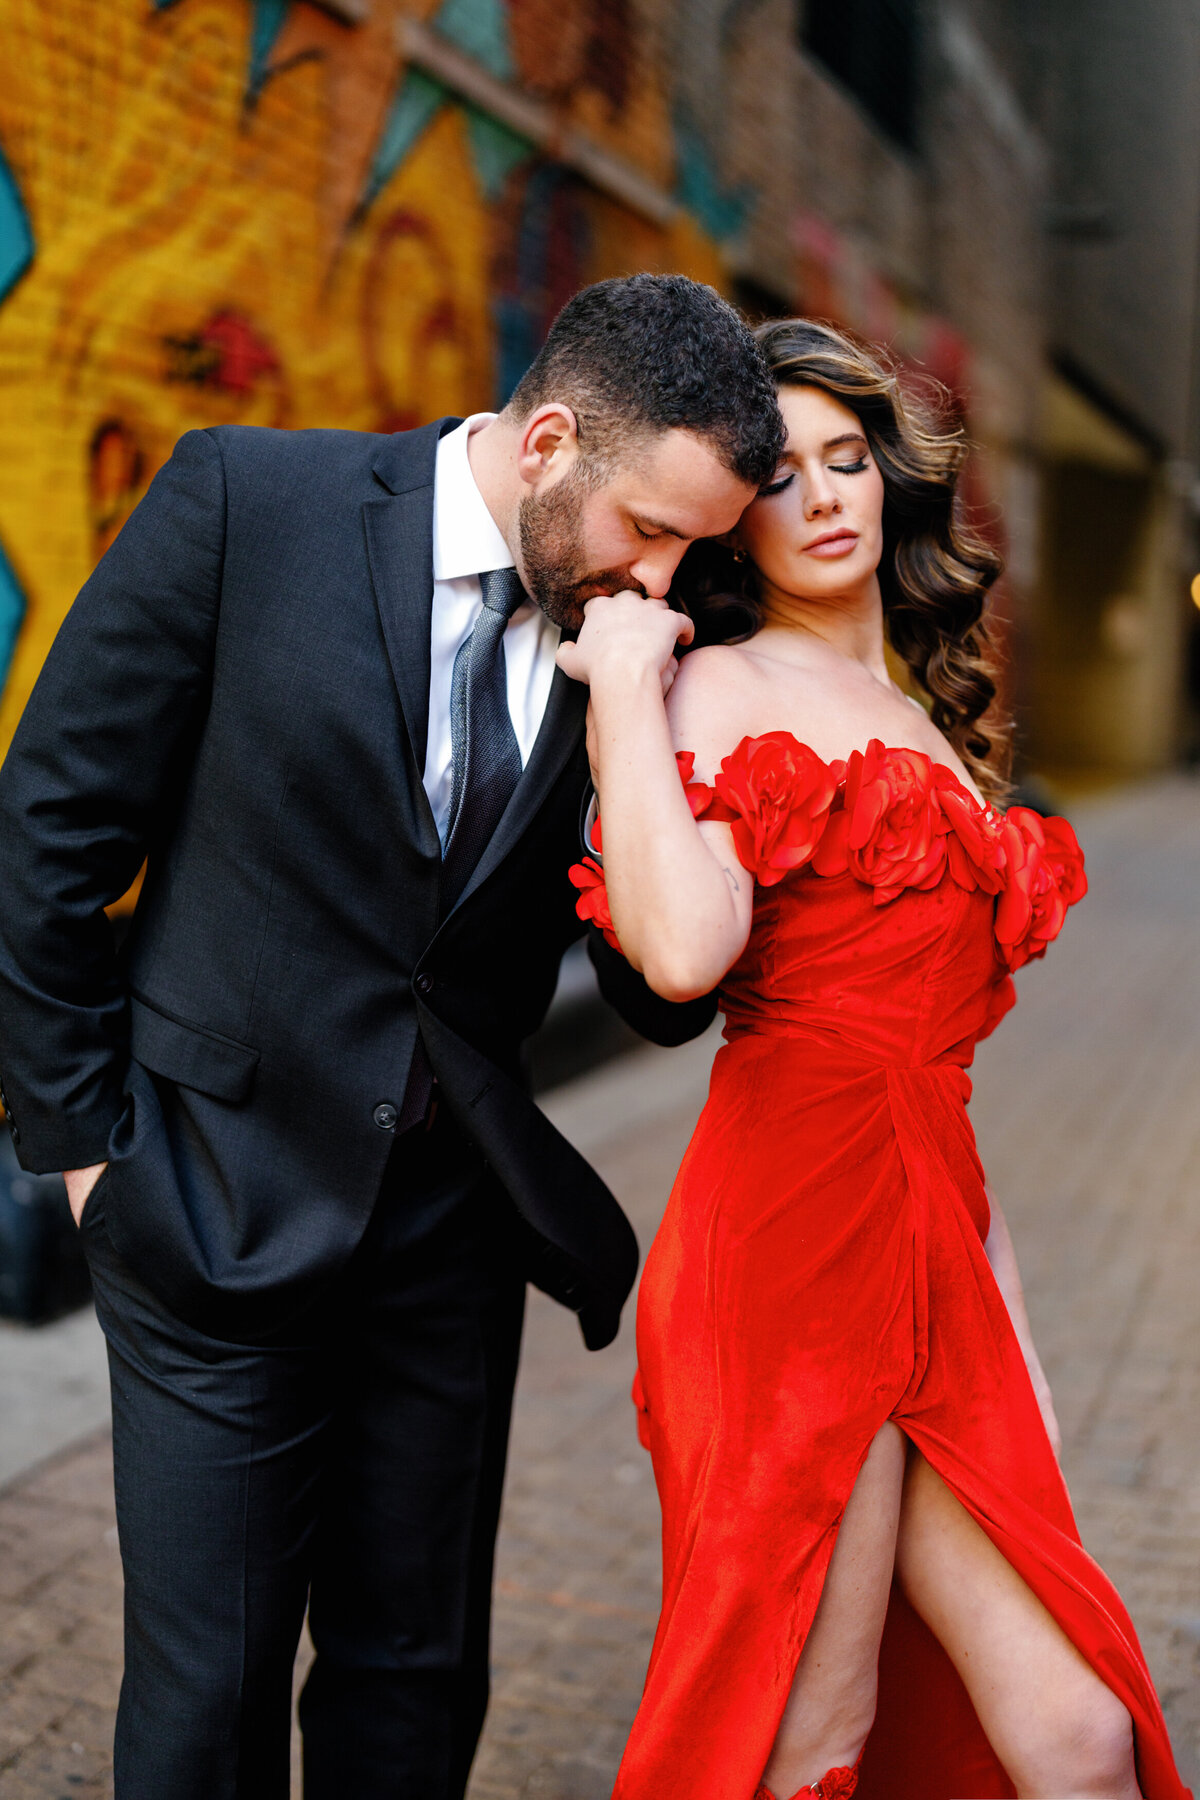 Aspen-Avenue-Chicago-Wedding-Photographer-Union-Station-Chicago-Theater-Engagement-Session-Timeless-Romantic-Red-Dress-Editorial-Stemming-From-Love-Bry-Jean-Artistry-The-Bridal-Collective-True-to-color-Luxury-FAV-107